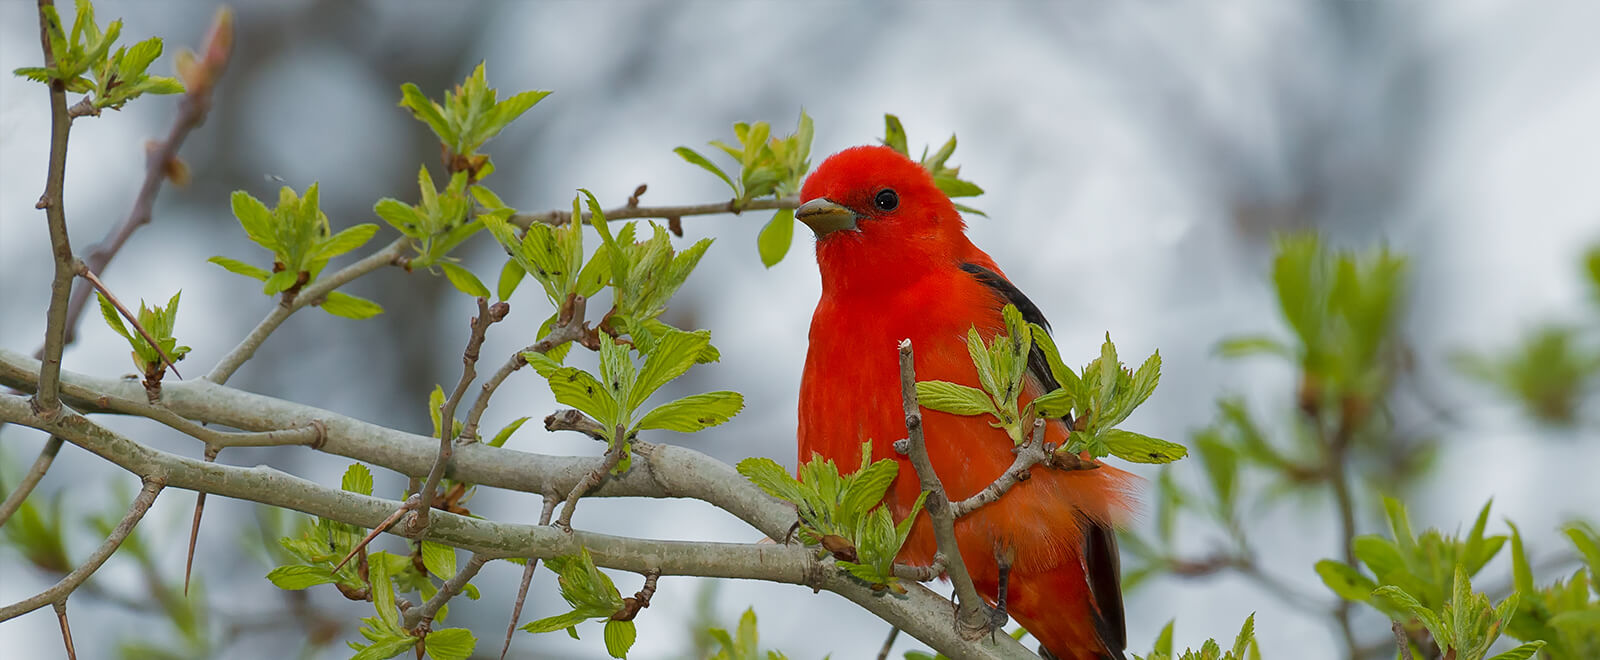 Red bright scarlet tanager bird on a treetop